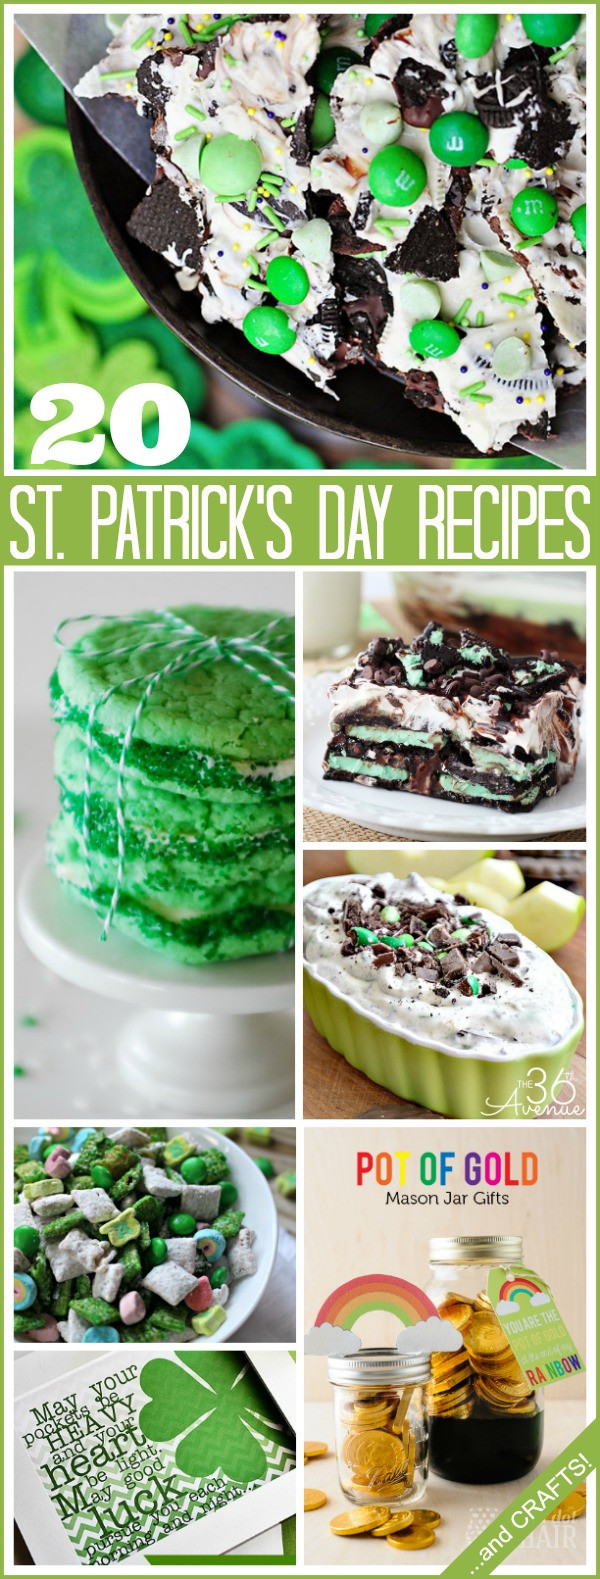 Recipes For St Patrick's Day Party
 The 36th AVENUE